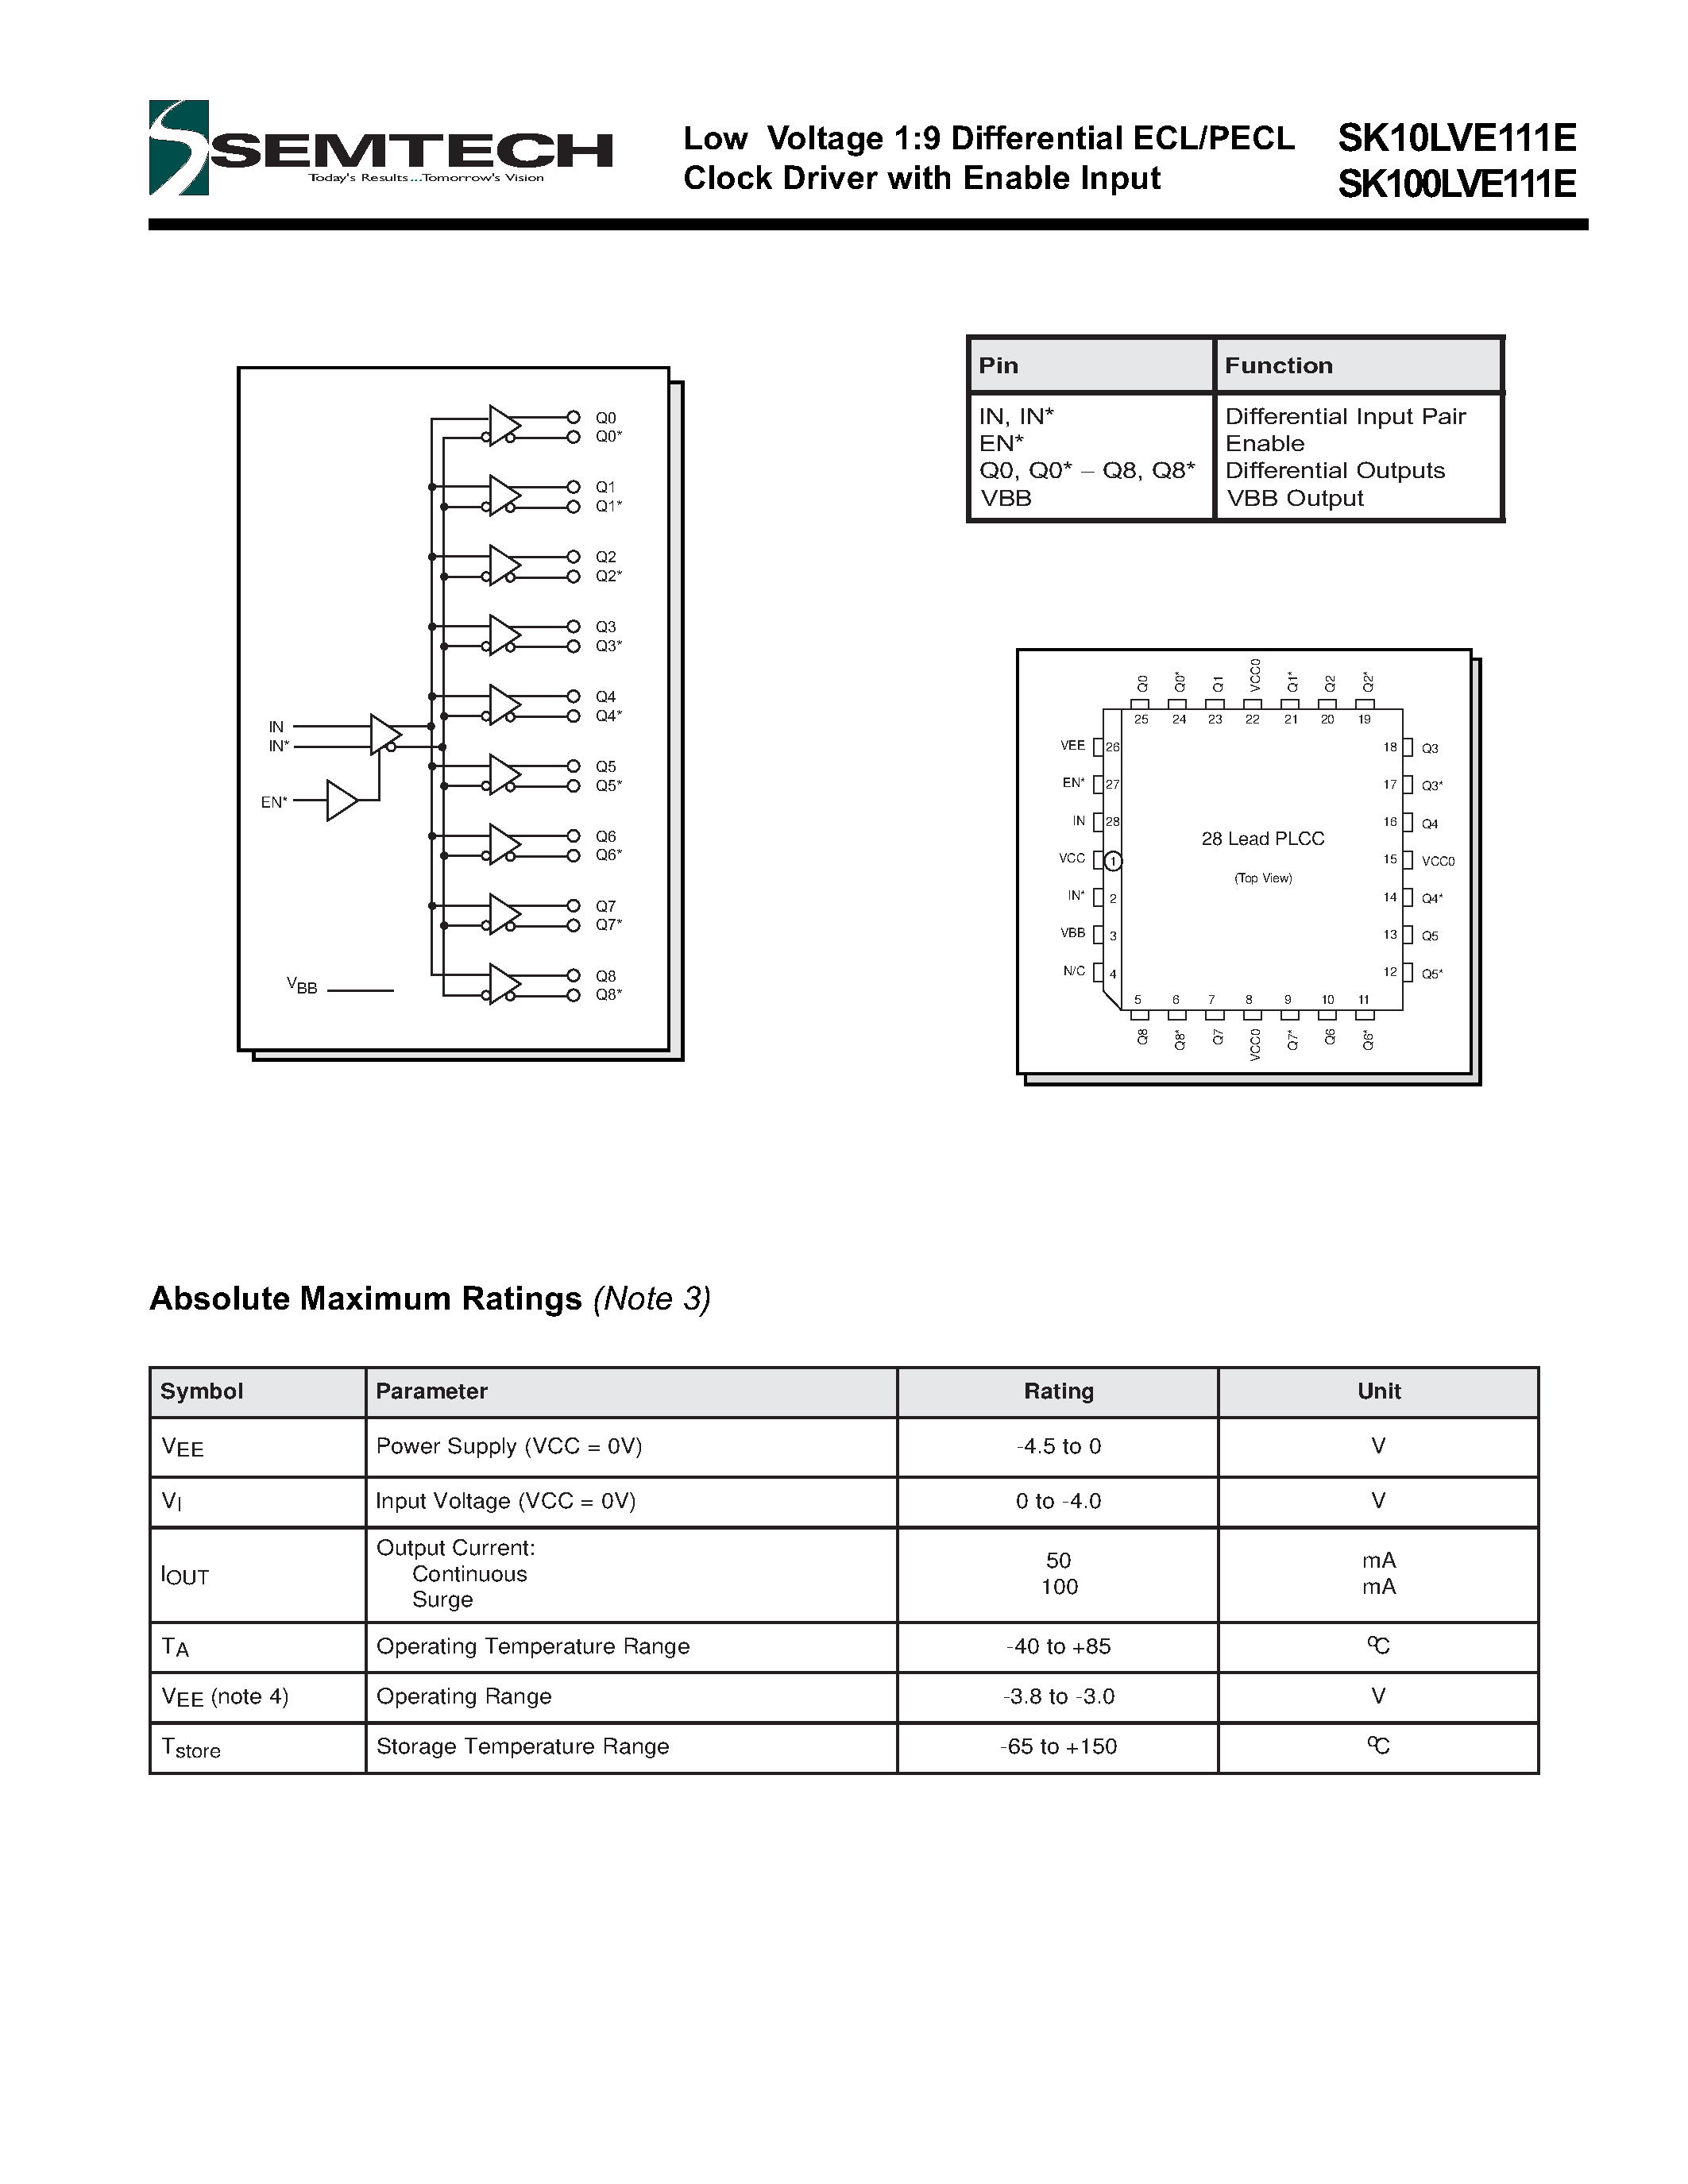 Datasheet SK10LVE111E - Low Voltage 1:9 Differential ECL/PECL Clock Driver with Enable Input page 2